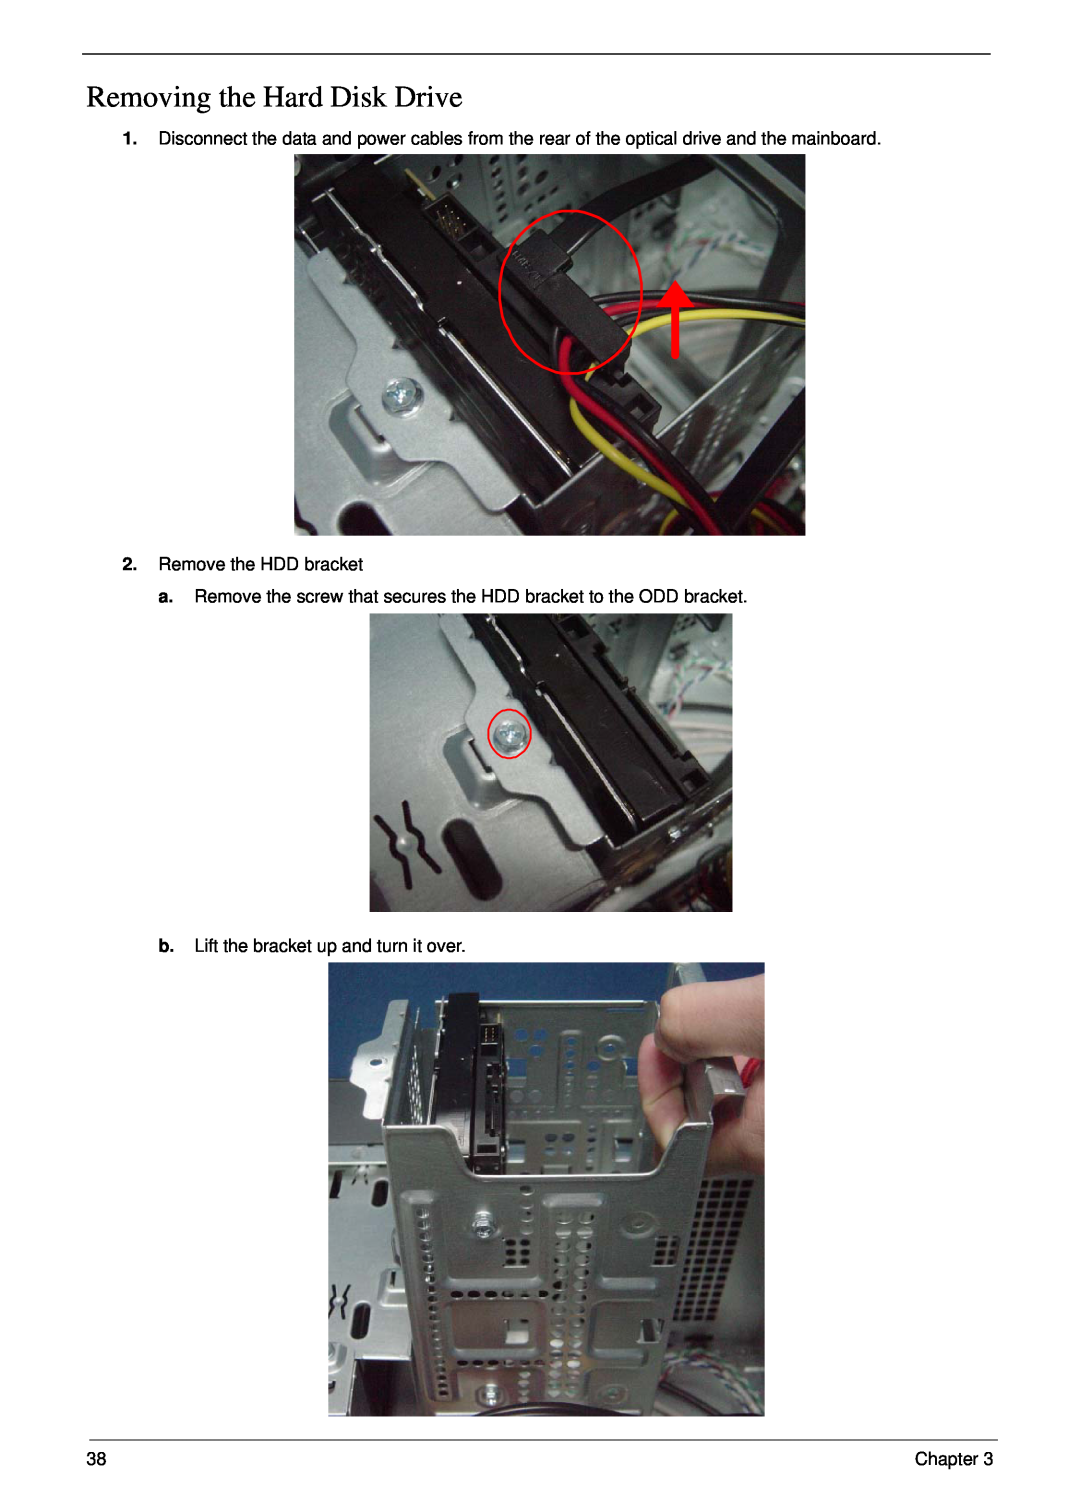 Acer m3400(g) manual Removing the Hard Disk Drive, Remove the HDD bracket, b. Lift the bracket up and turn it over 